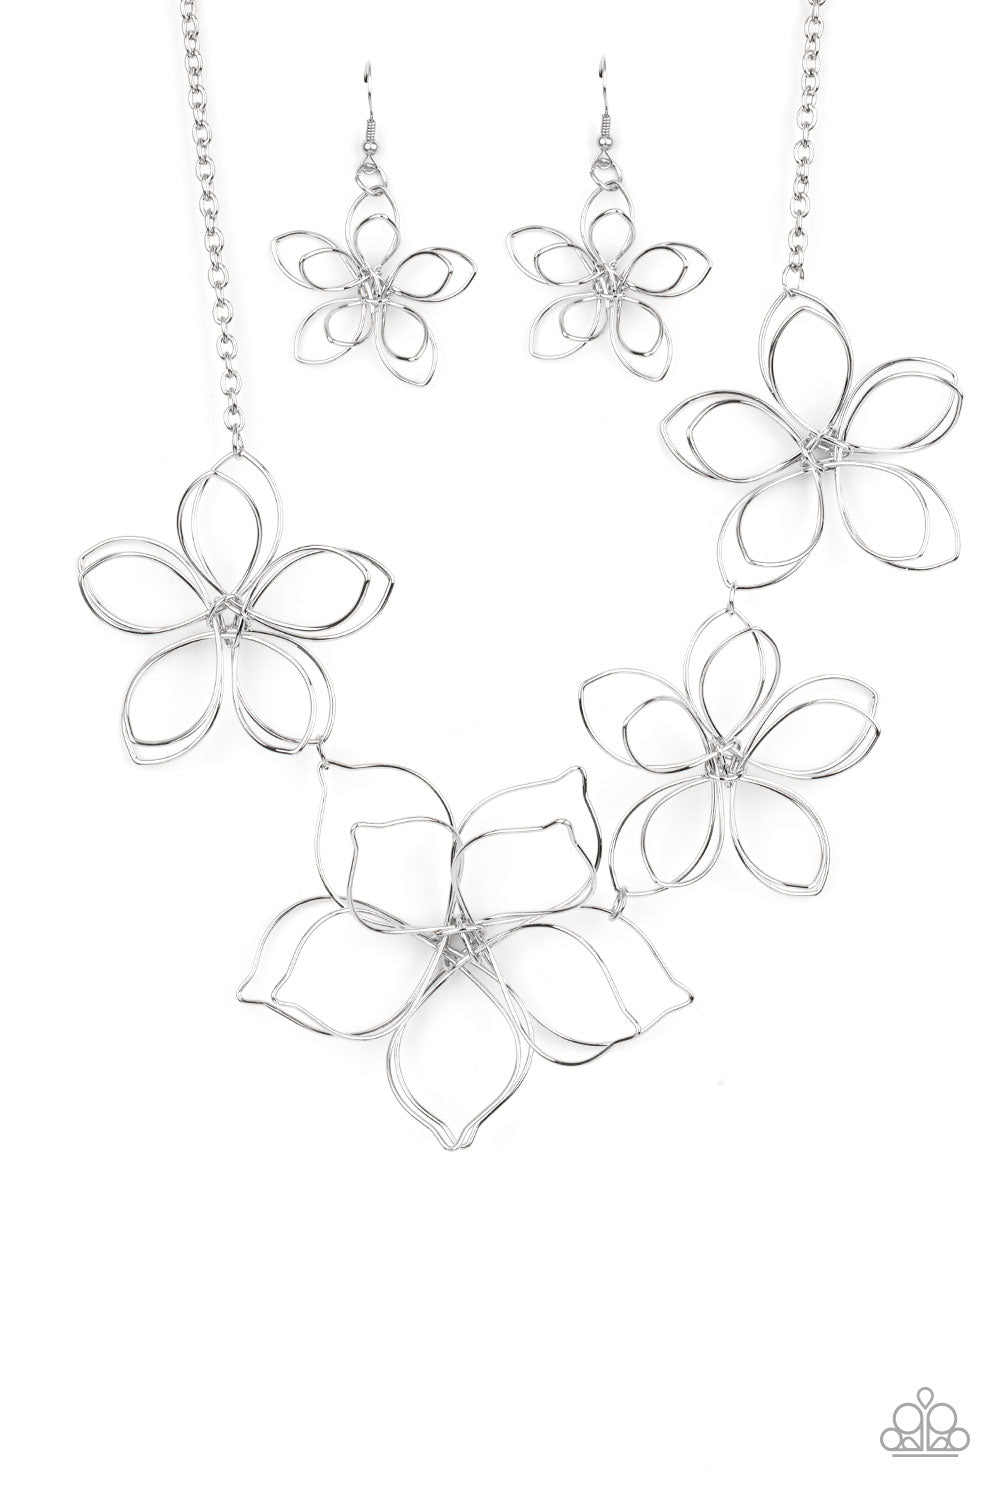 Shiny silver wire delicately twists into oversized blossoms. Varying in size, the airy floral frames delicately link into an asymmetrical display as the layered frames elegantly pop beneath the collar. Features an adjustable clasp closure.